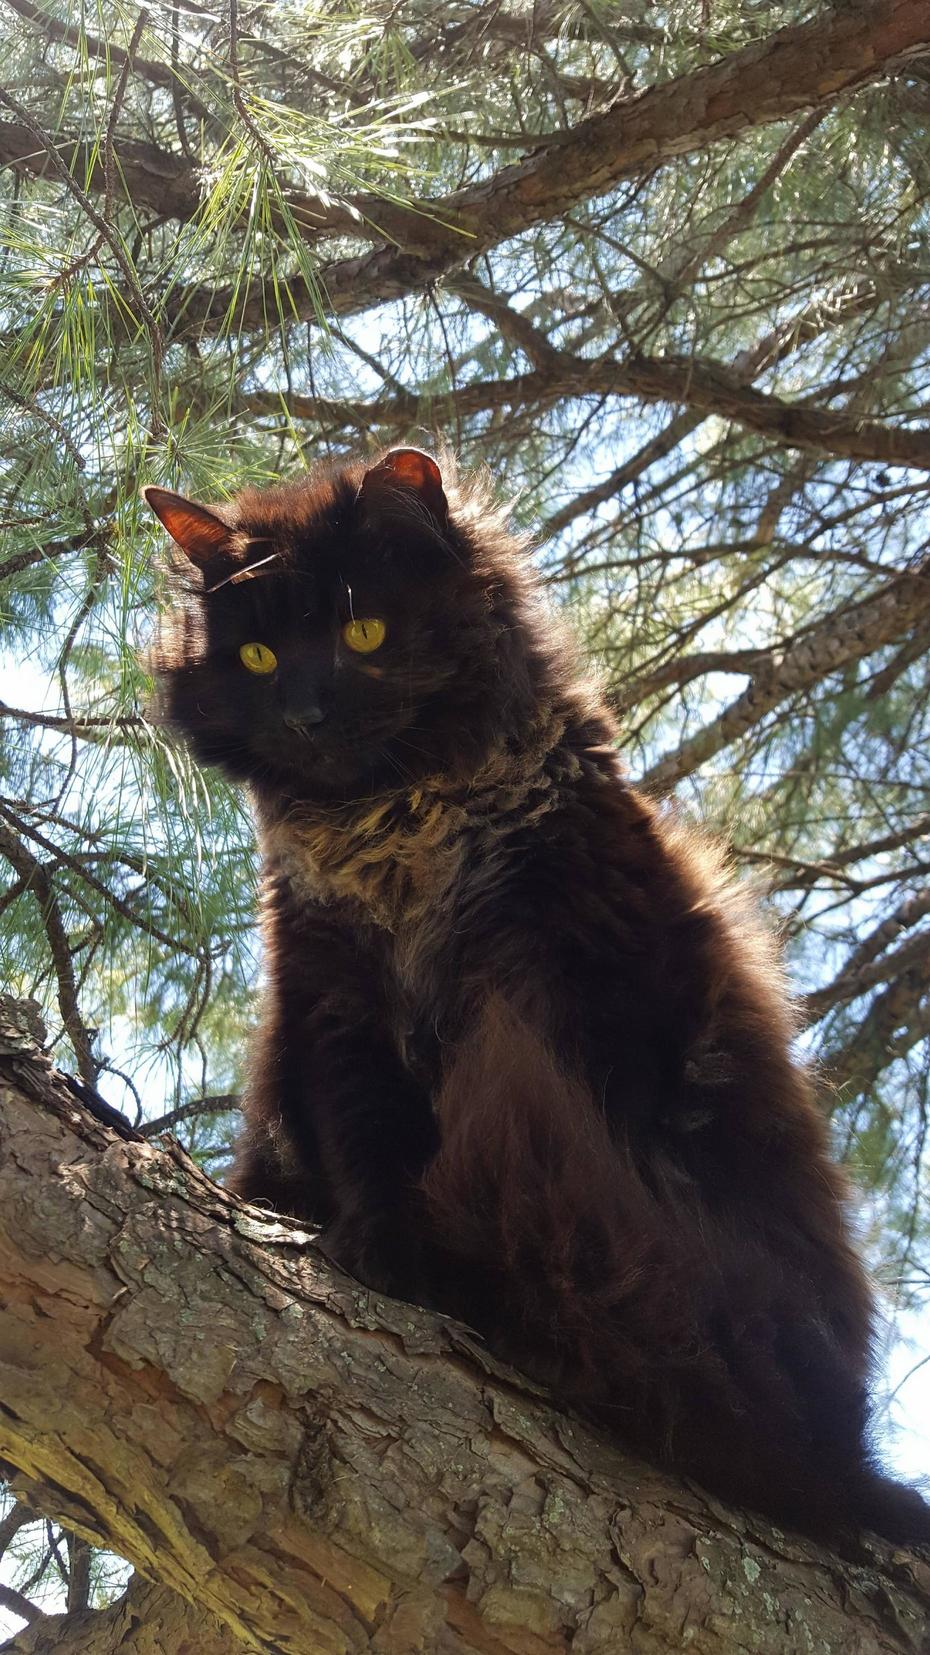 From a wal mart parking lot to loving the farm life climbing trees. everyone meet the majestic evelyn.